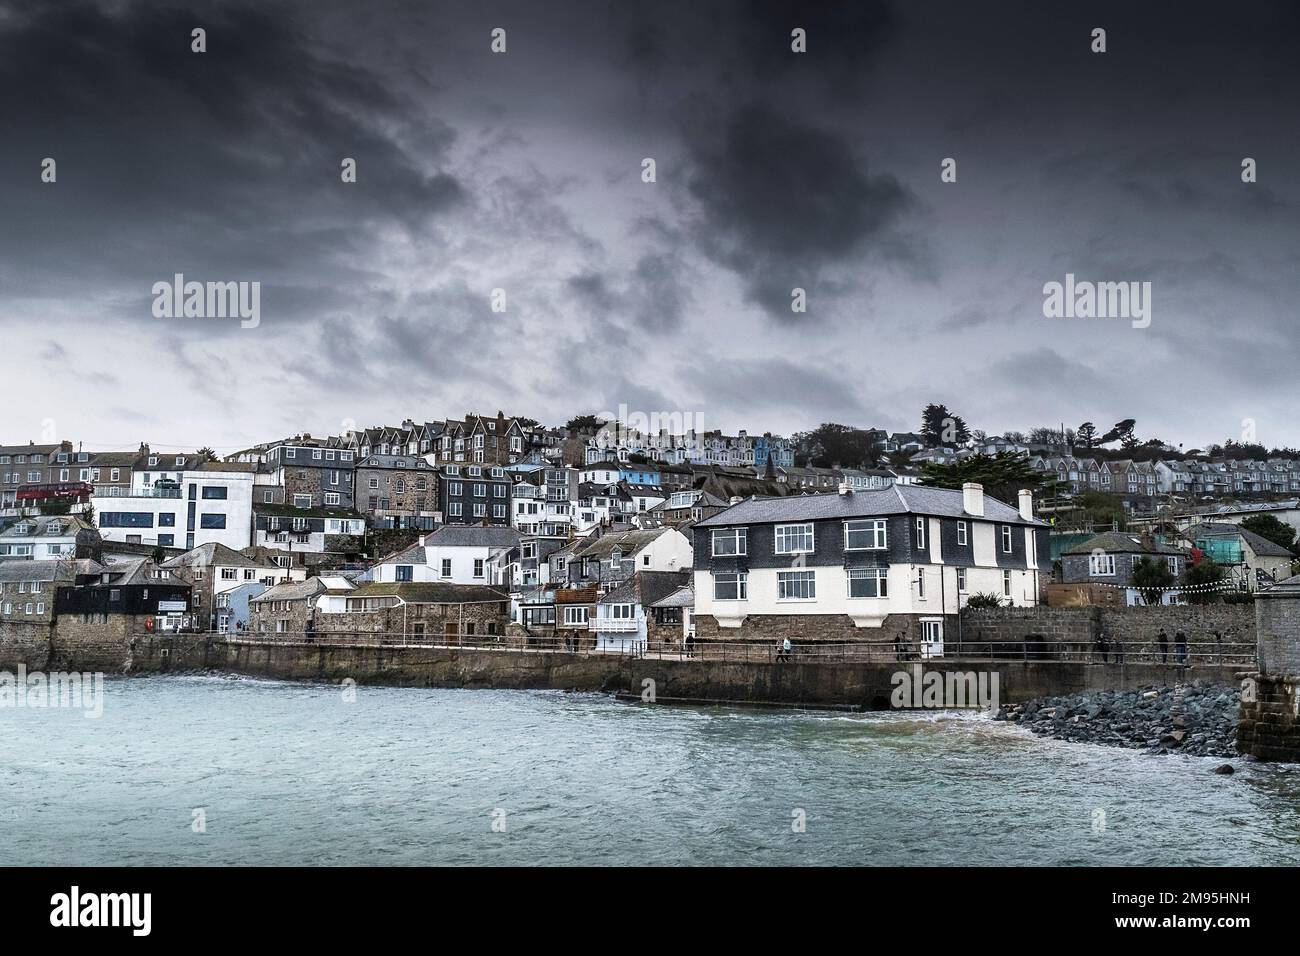 UK weather.  A cloudy chilly miserable day in the historic seaside town of St Ives in Cornwall in England in the UK. Stock Photo